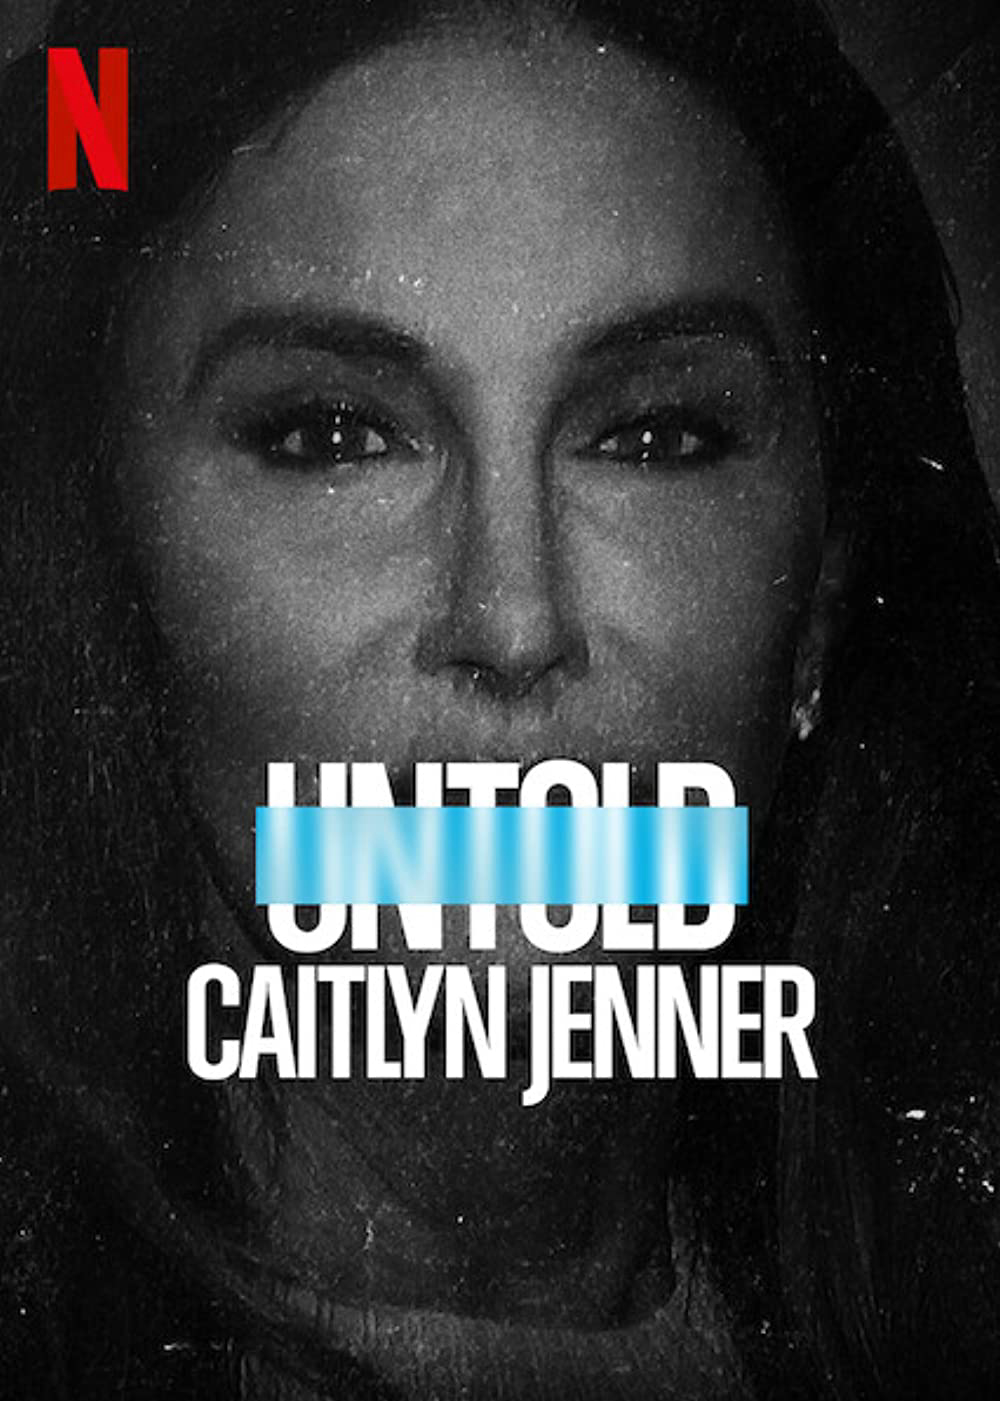 Poster Phim Bí mật giới thể thao: Caitlyn Jenner (Untold: Caitlyn Jenner)